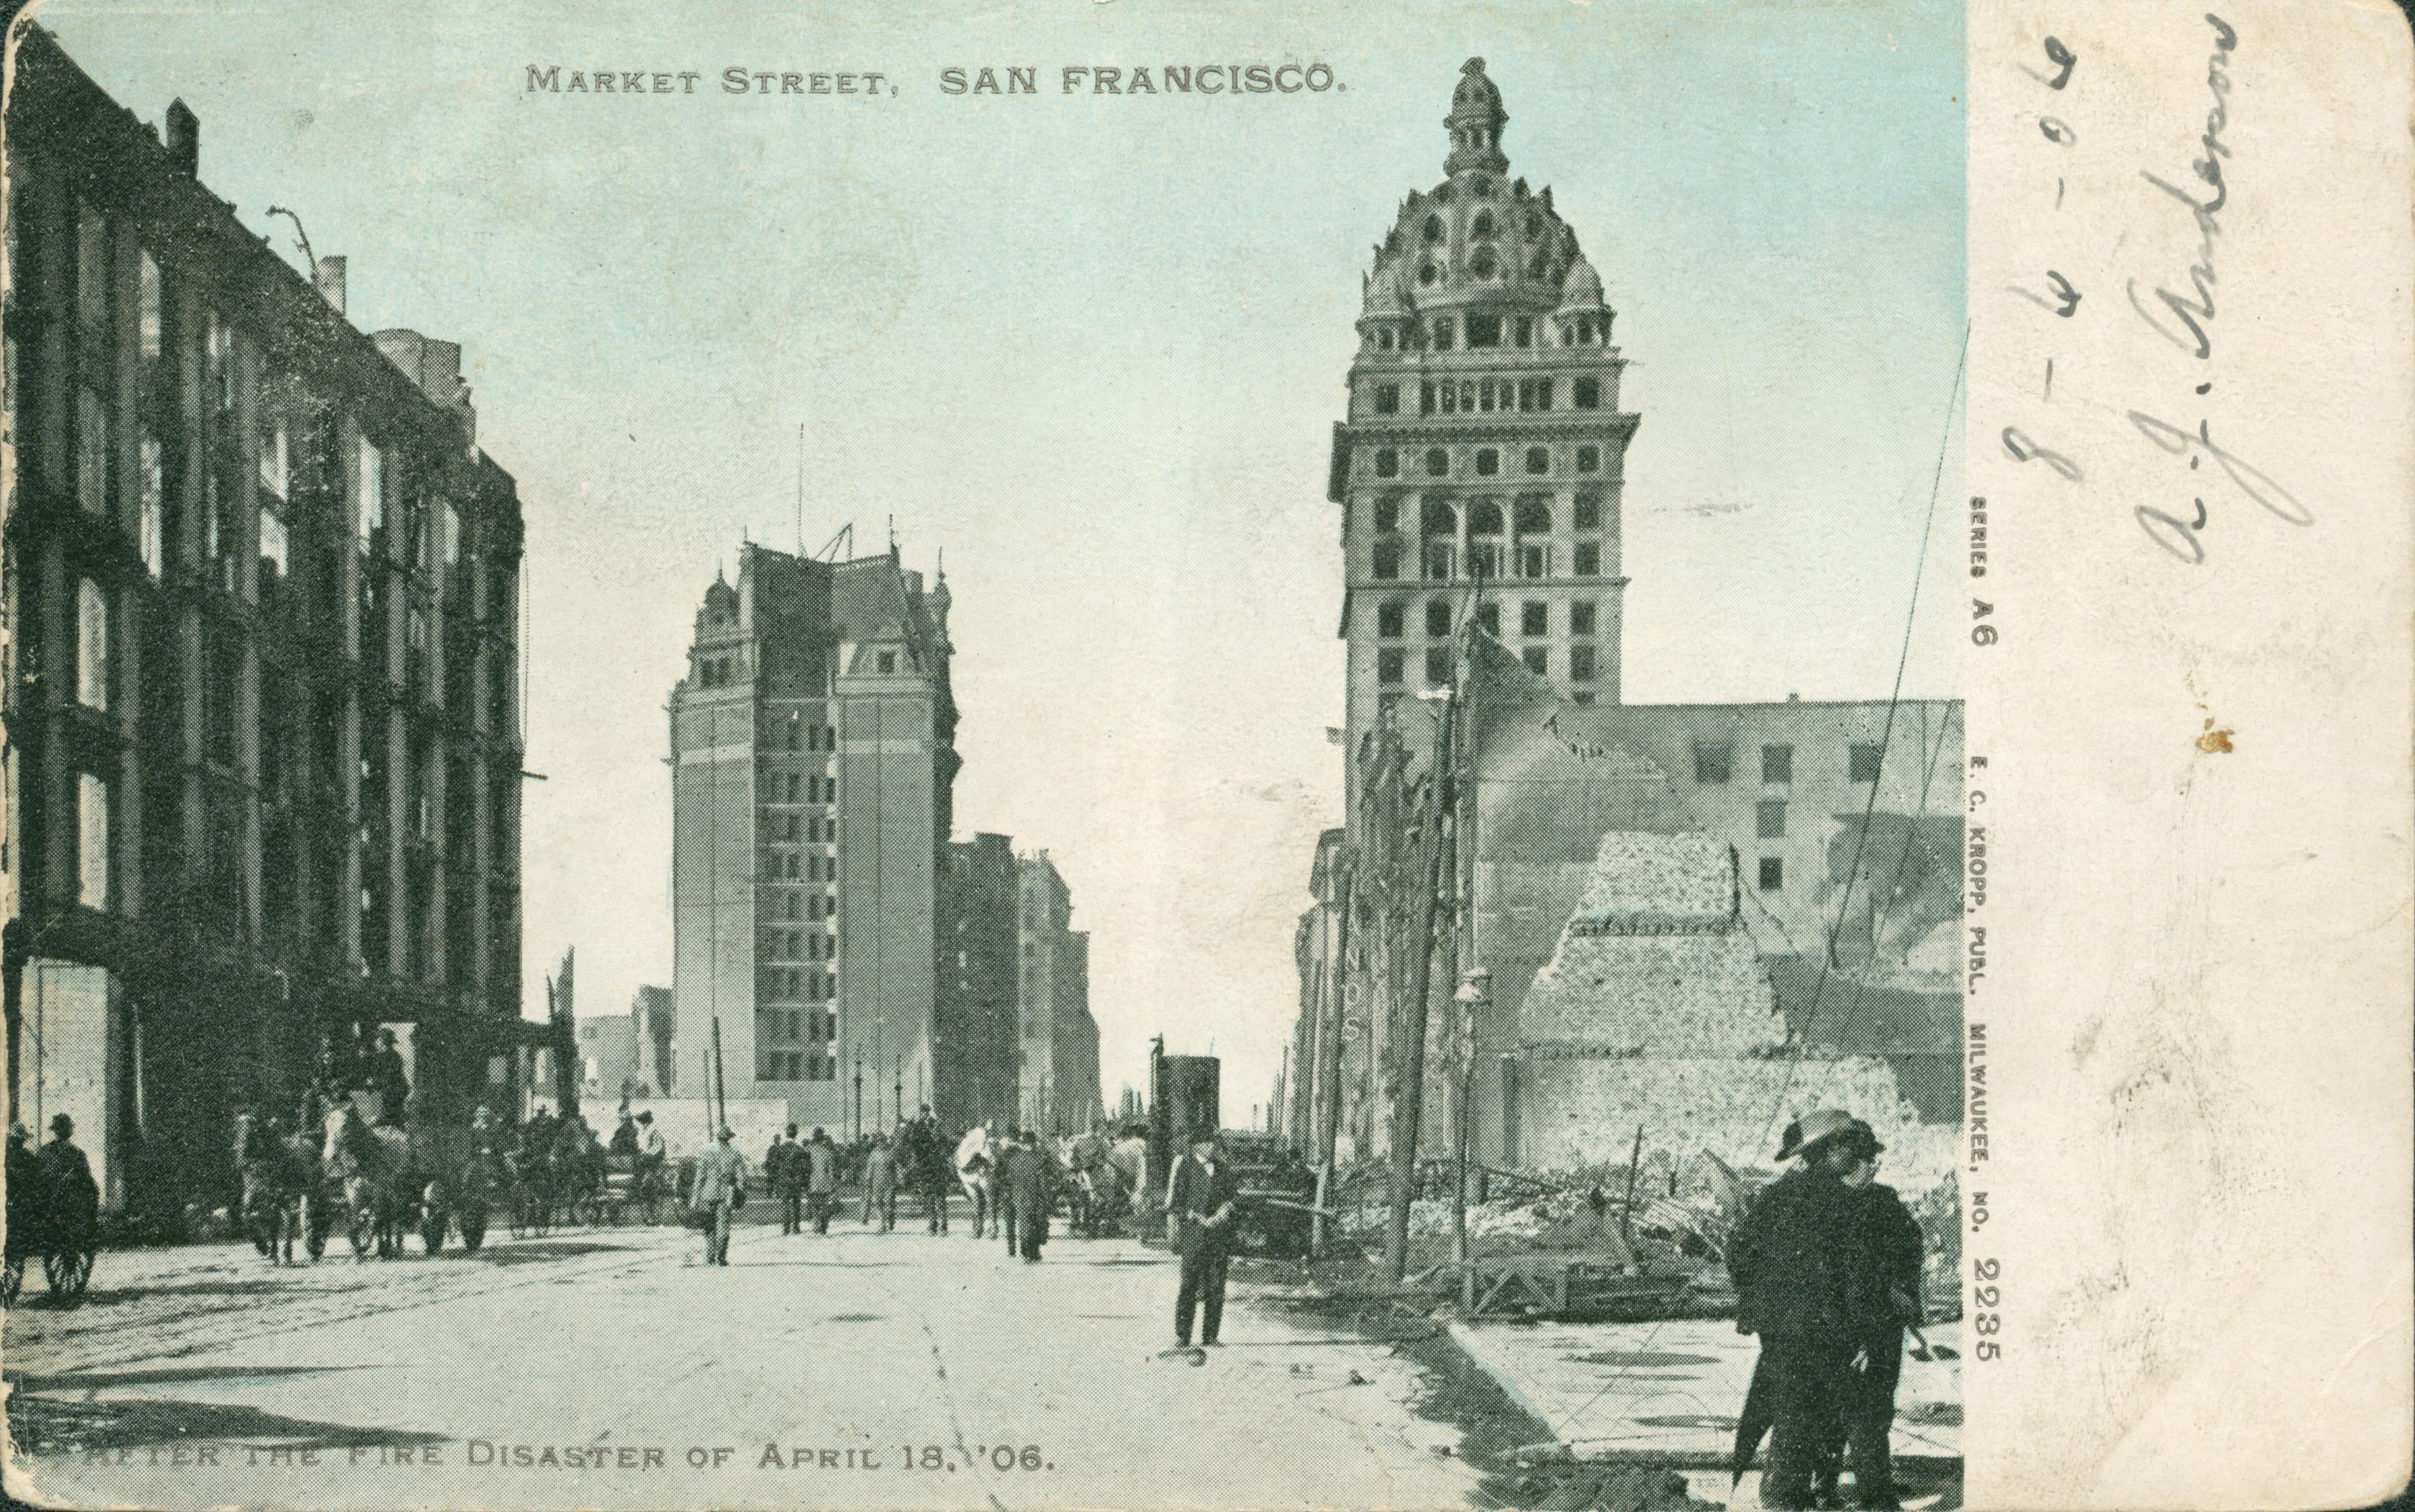 Shows people walking down Market Street with ruined buildings along both sides of the street.